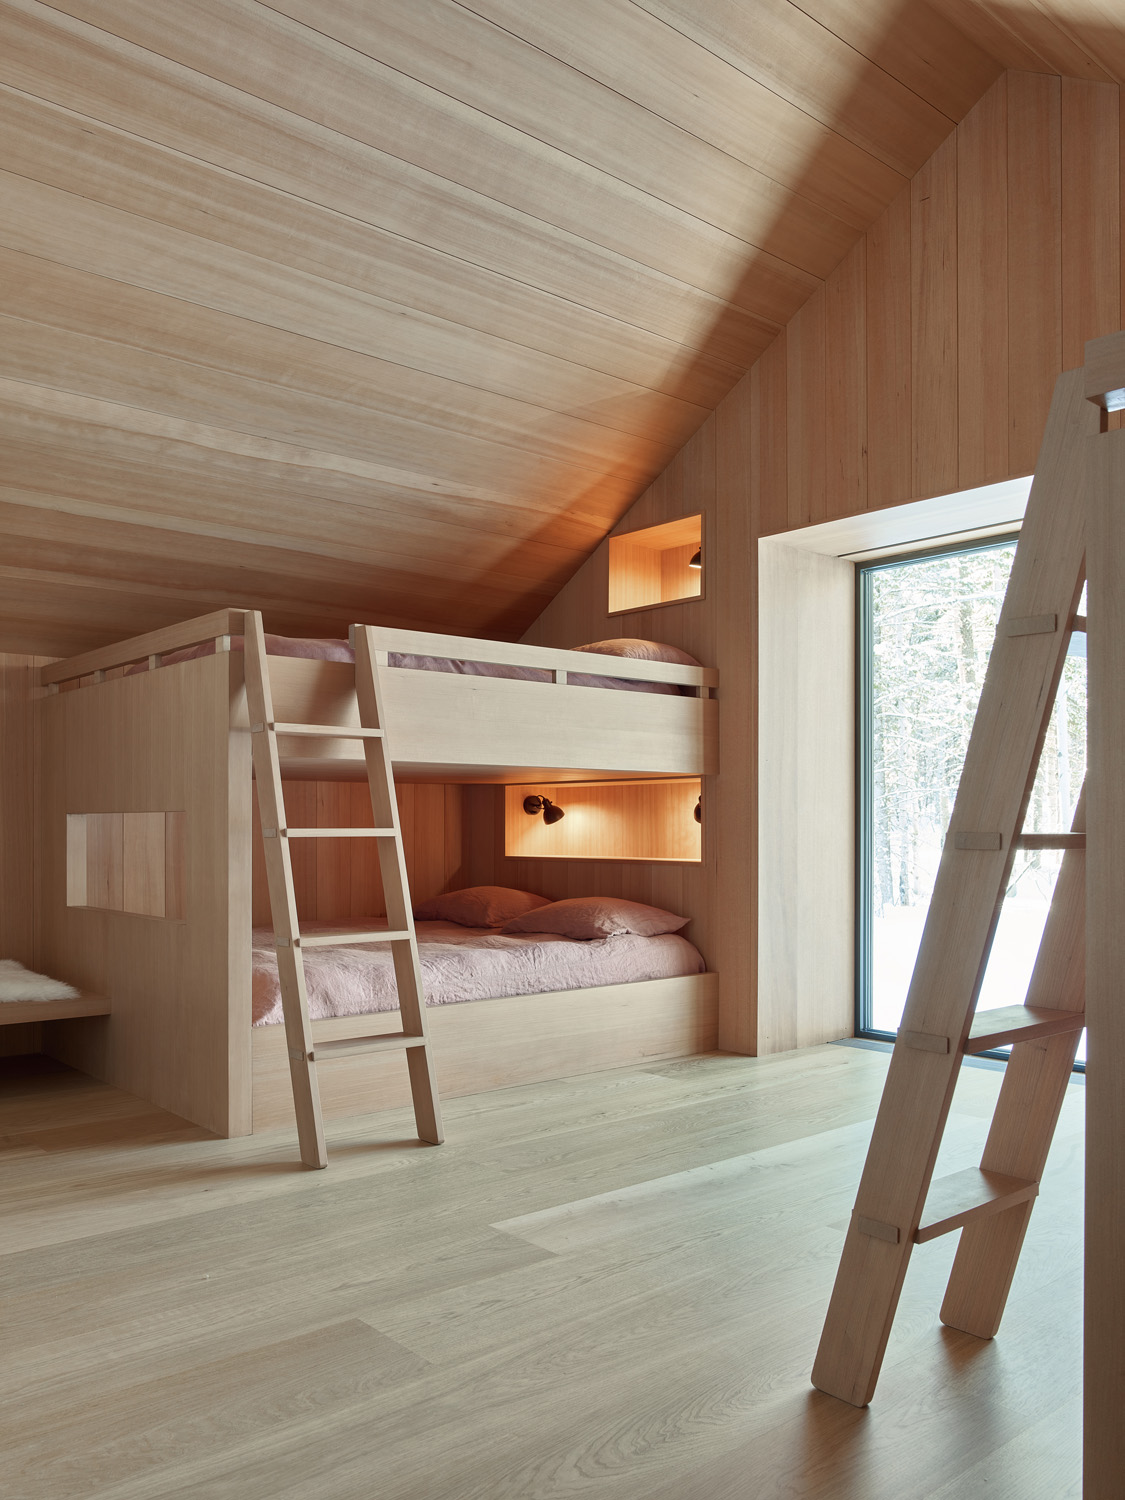 Ladders in bedroom by McLean Quinlan - luxury contemporary design and architecture in London